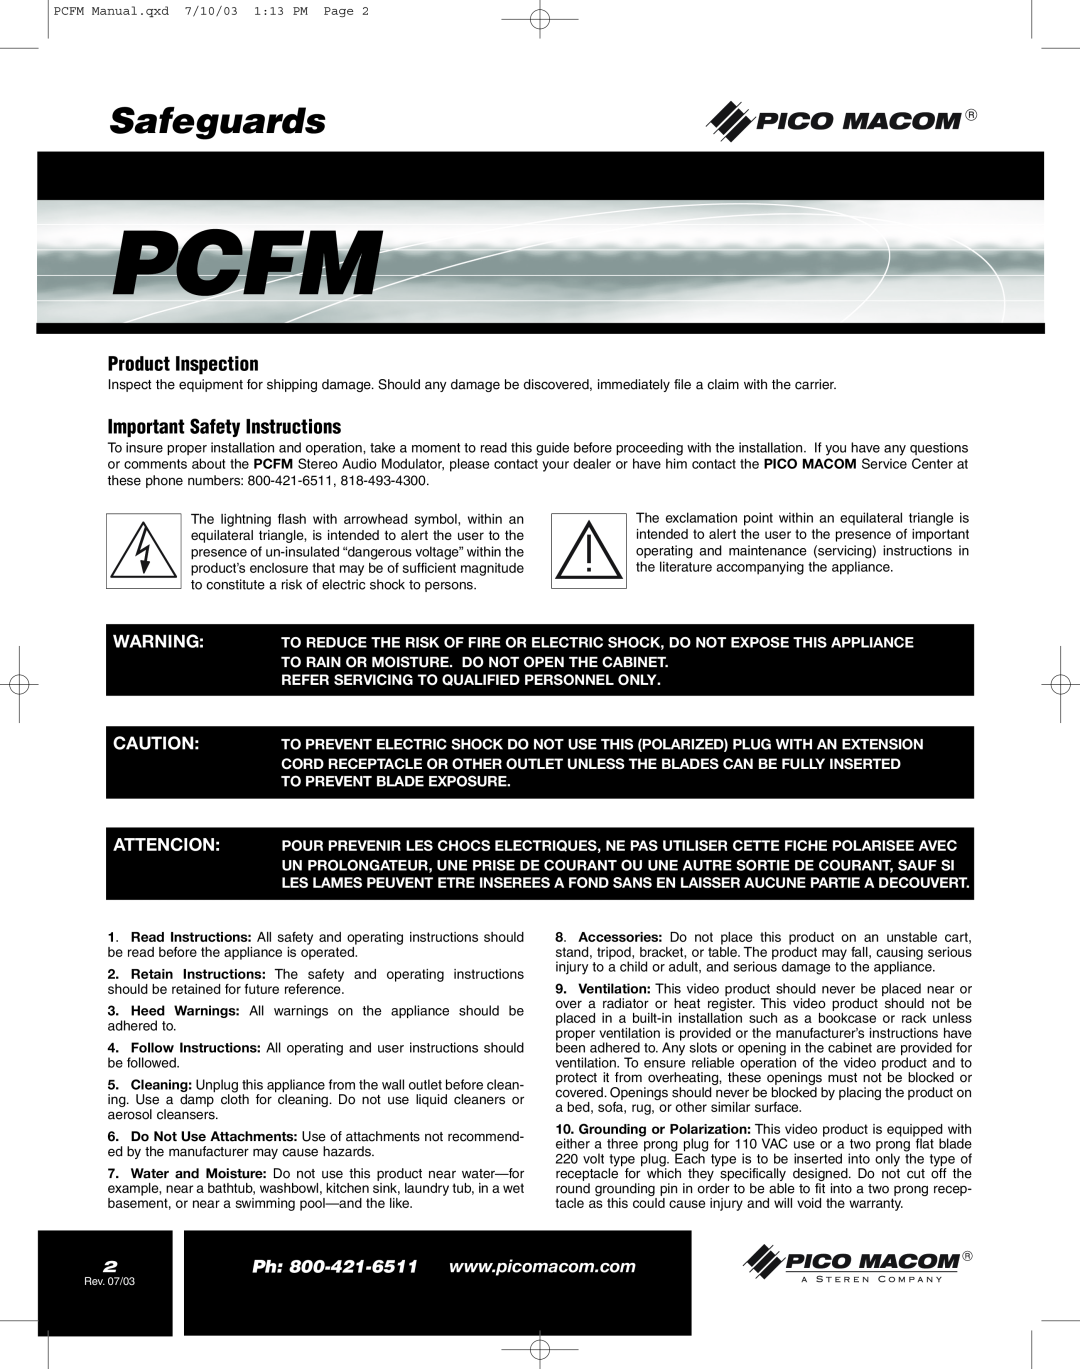 Pico Macom FM Stereo Audio Modulator operation manual Safeguards, Product Inspection, Important Safety Instructions, Pcfm 